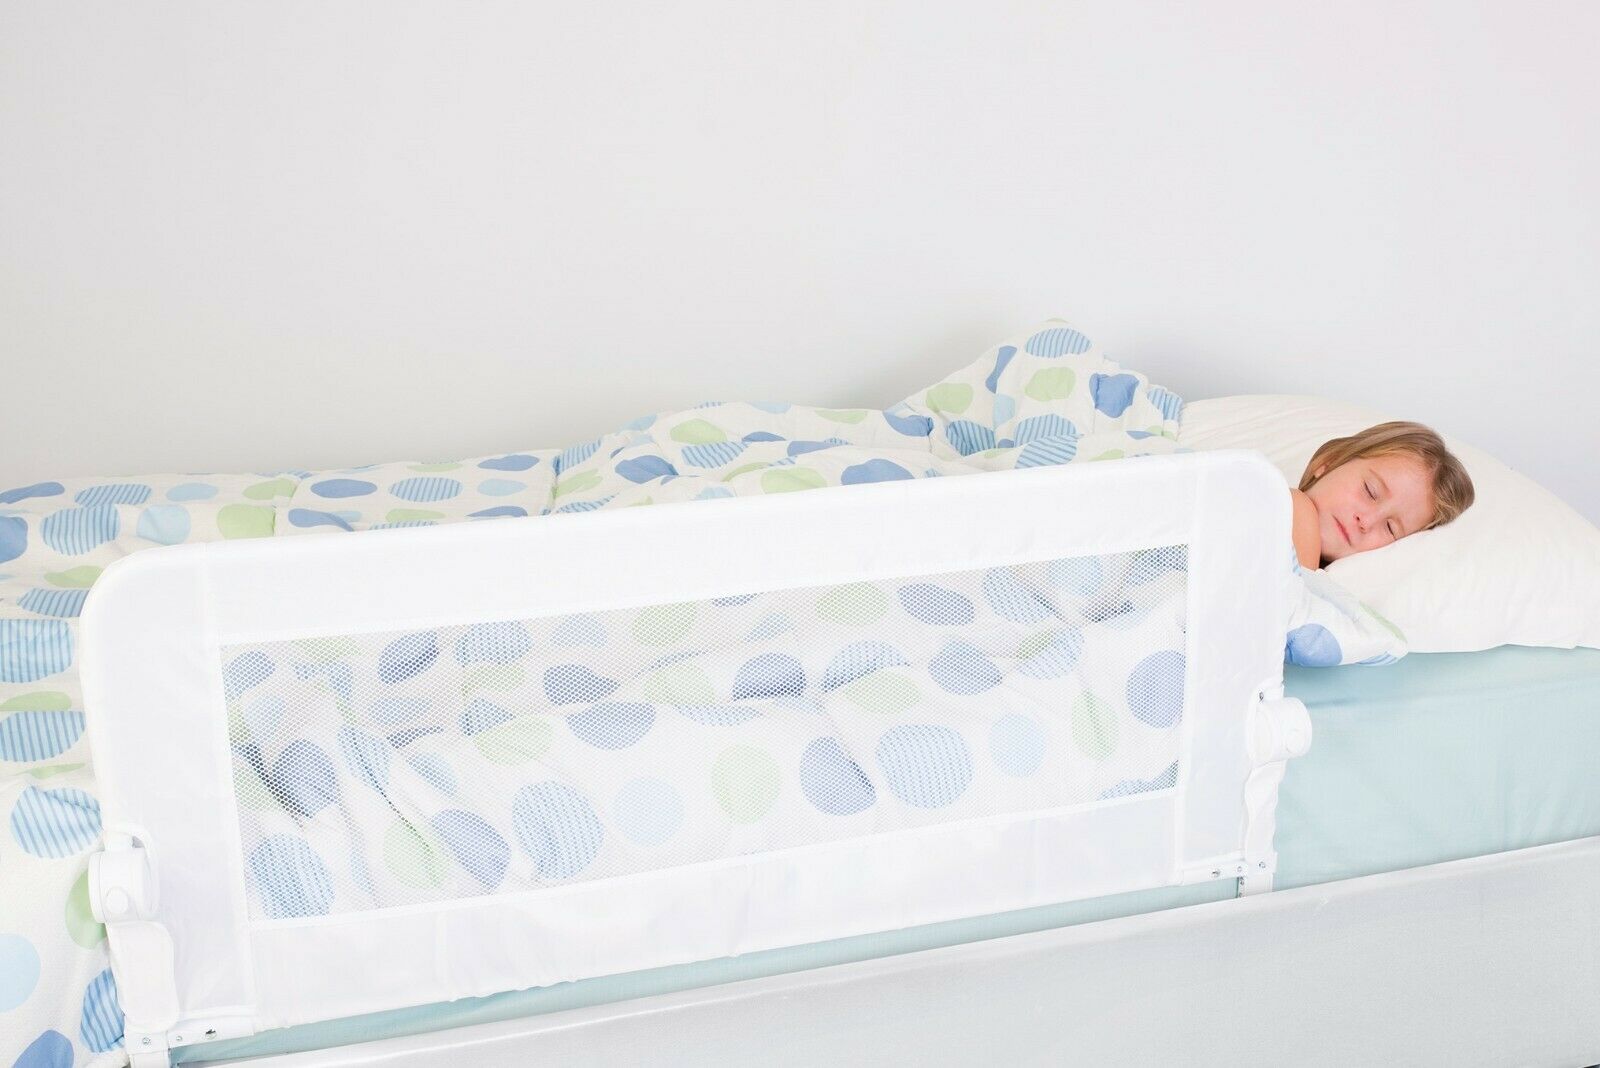 DREAMBABY FOLDING SAFETY GATE BED RAIL MAGGIE 110CM